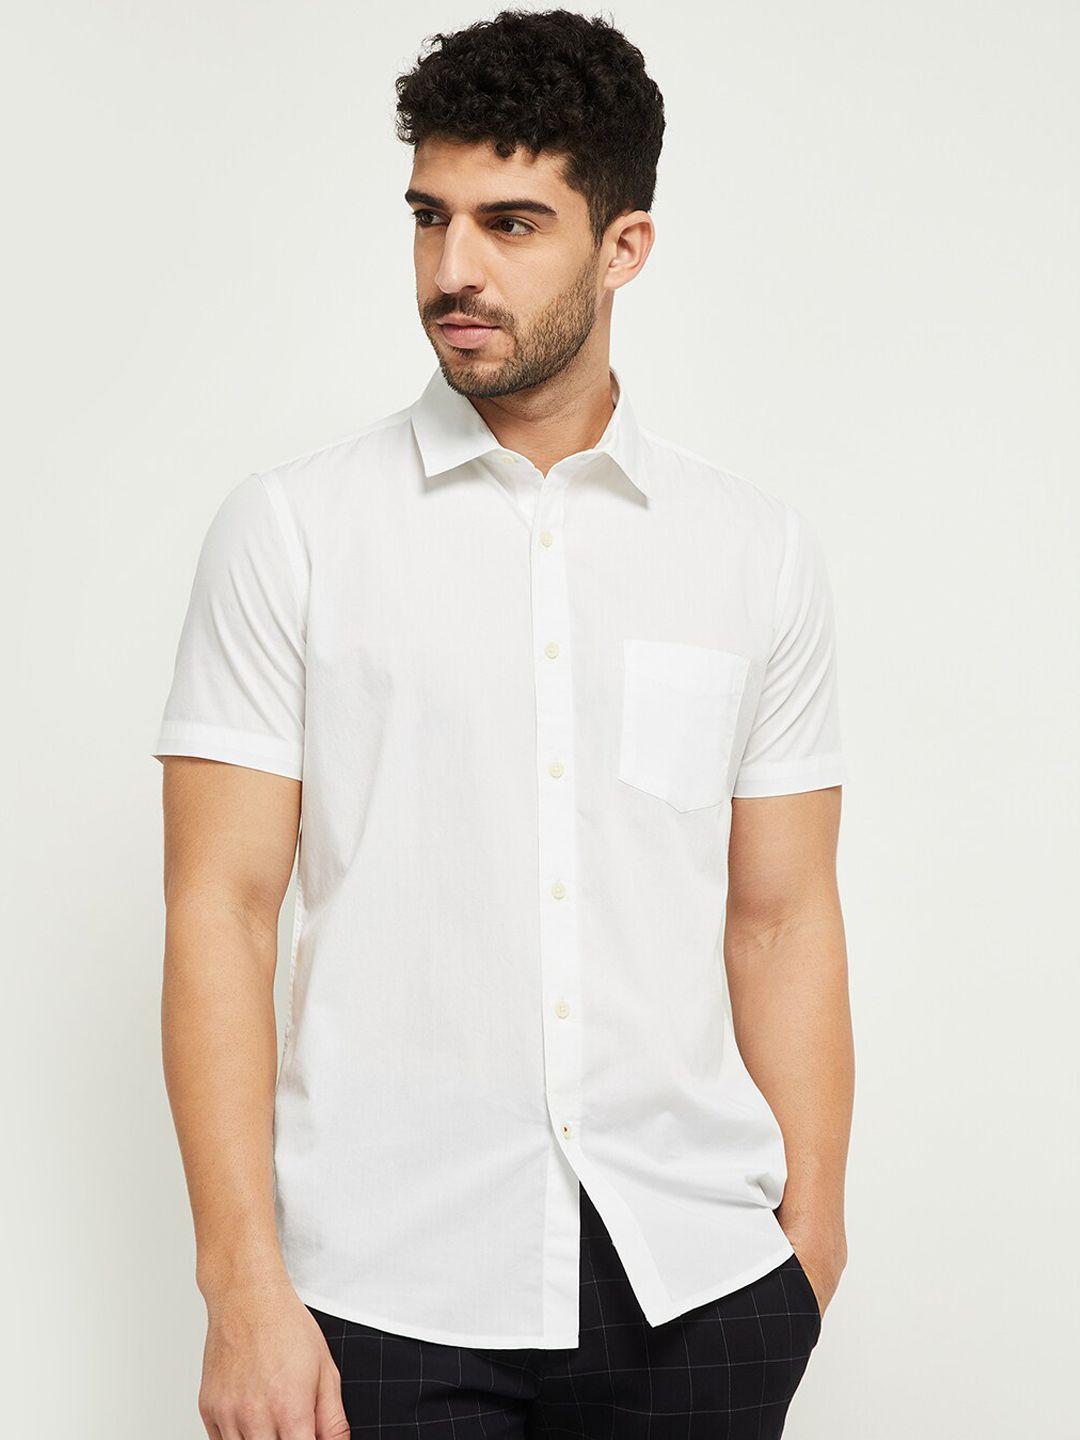 max men white slim fit opaque casual shirt